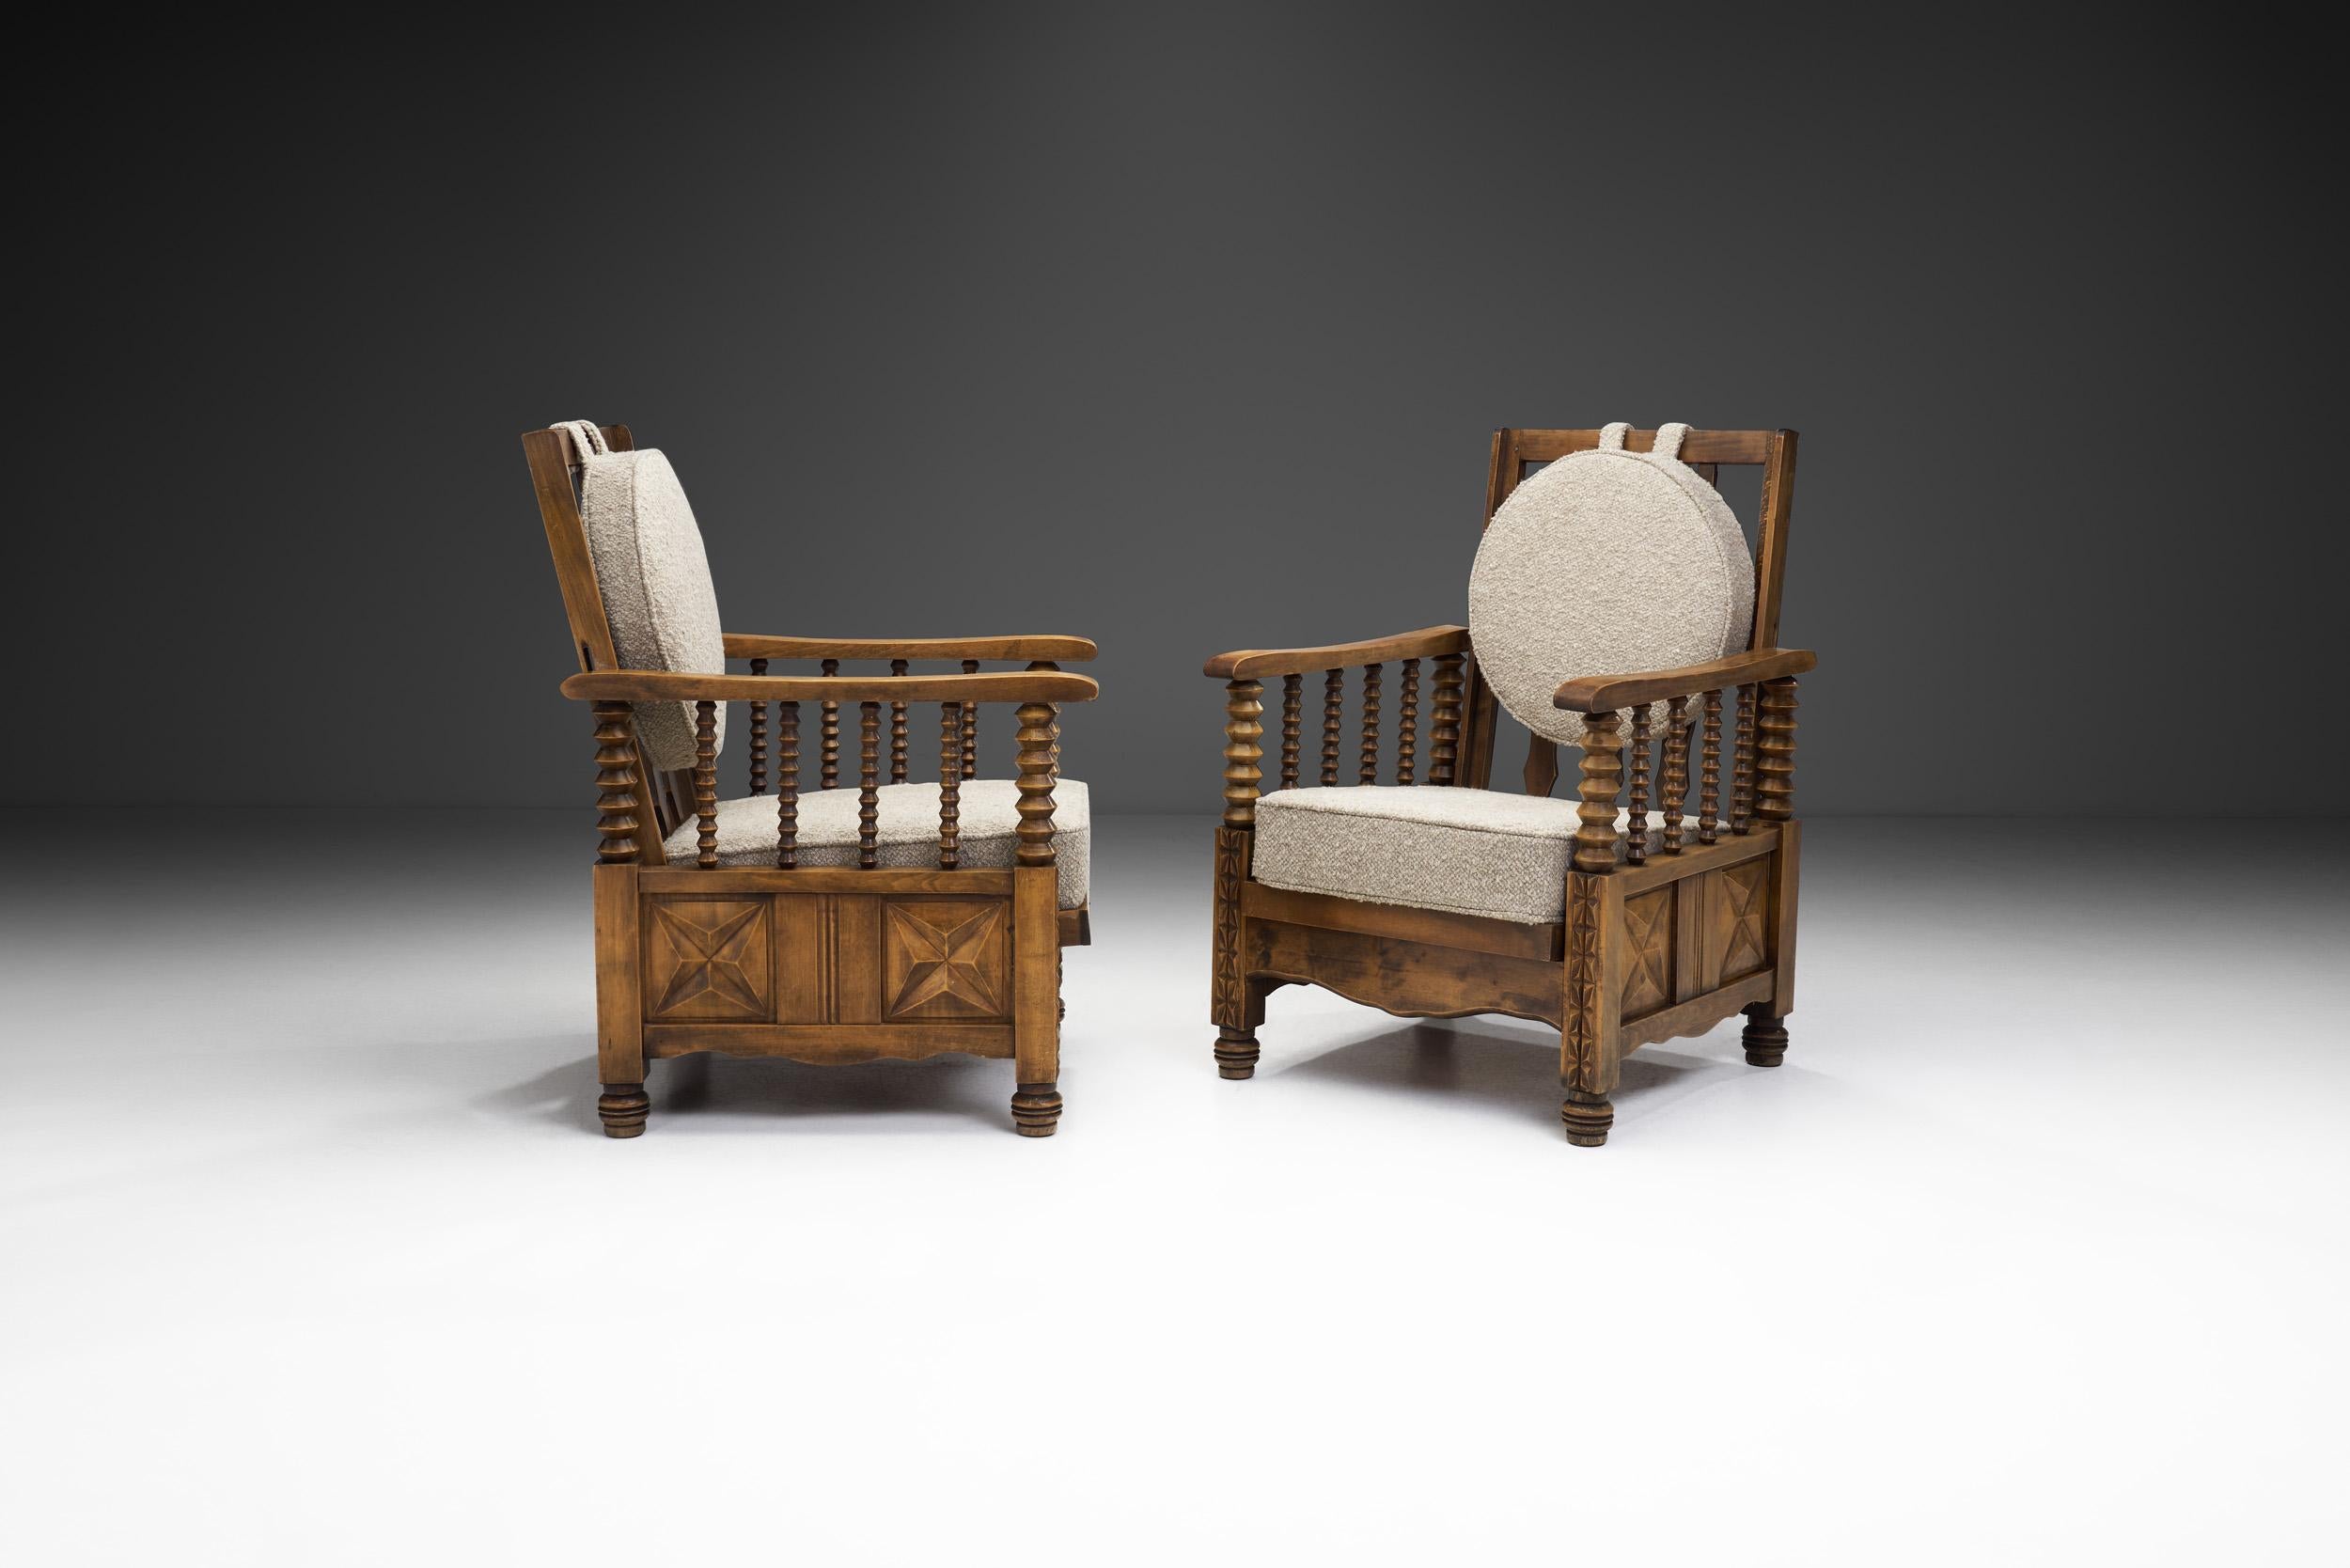 In the realm of mid-century furniture, there exist turned furniture with a historical charm that exudes timeless elegance and craftsmanship, harkening back to the design sensibilities of the previous eras. Crafted from exquisite stained oak, these